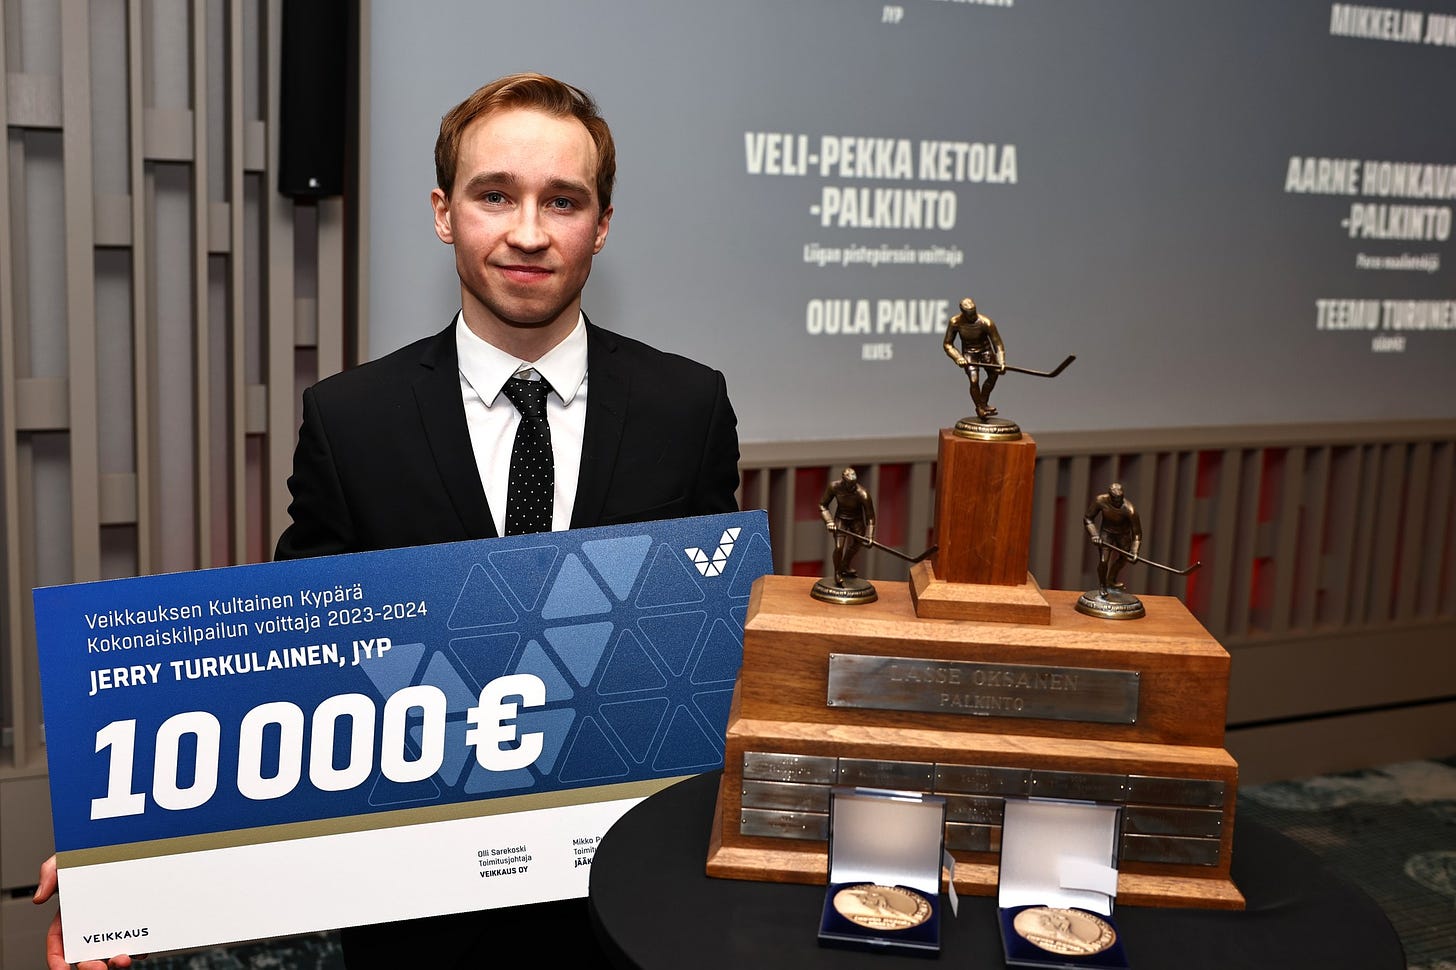 Jerry Turkulainen posing with a check and his trophies and medals during an award ceremony.